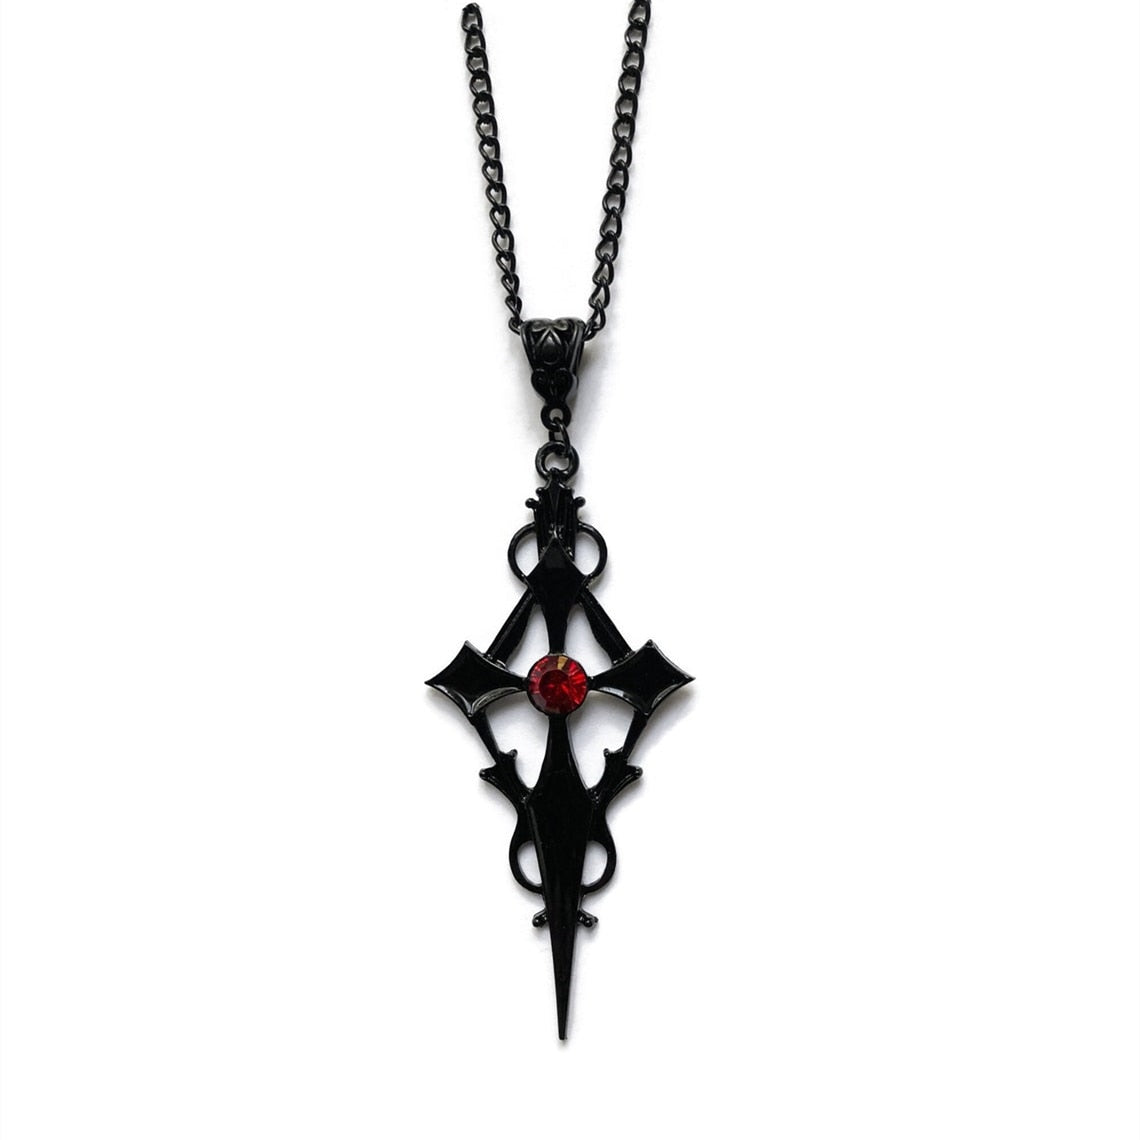 Vintage Gothic Style Japanned Black Cross Necklace - Ruby Lane